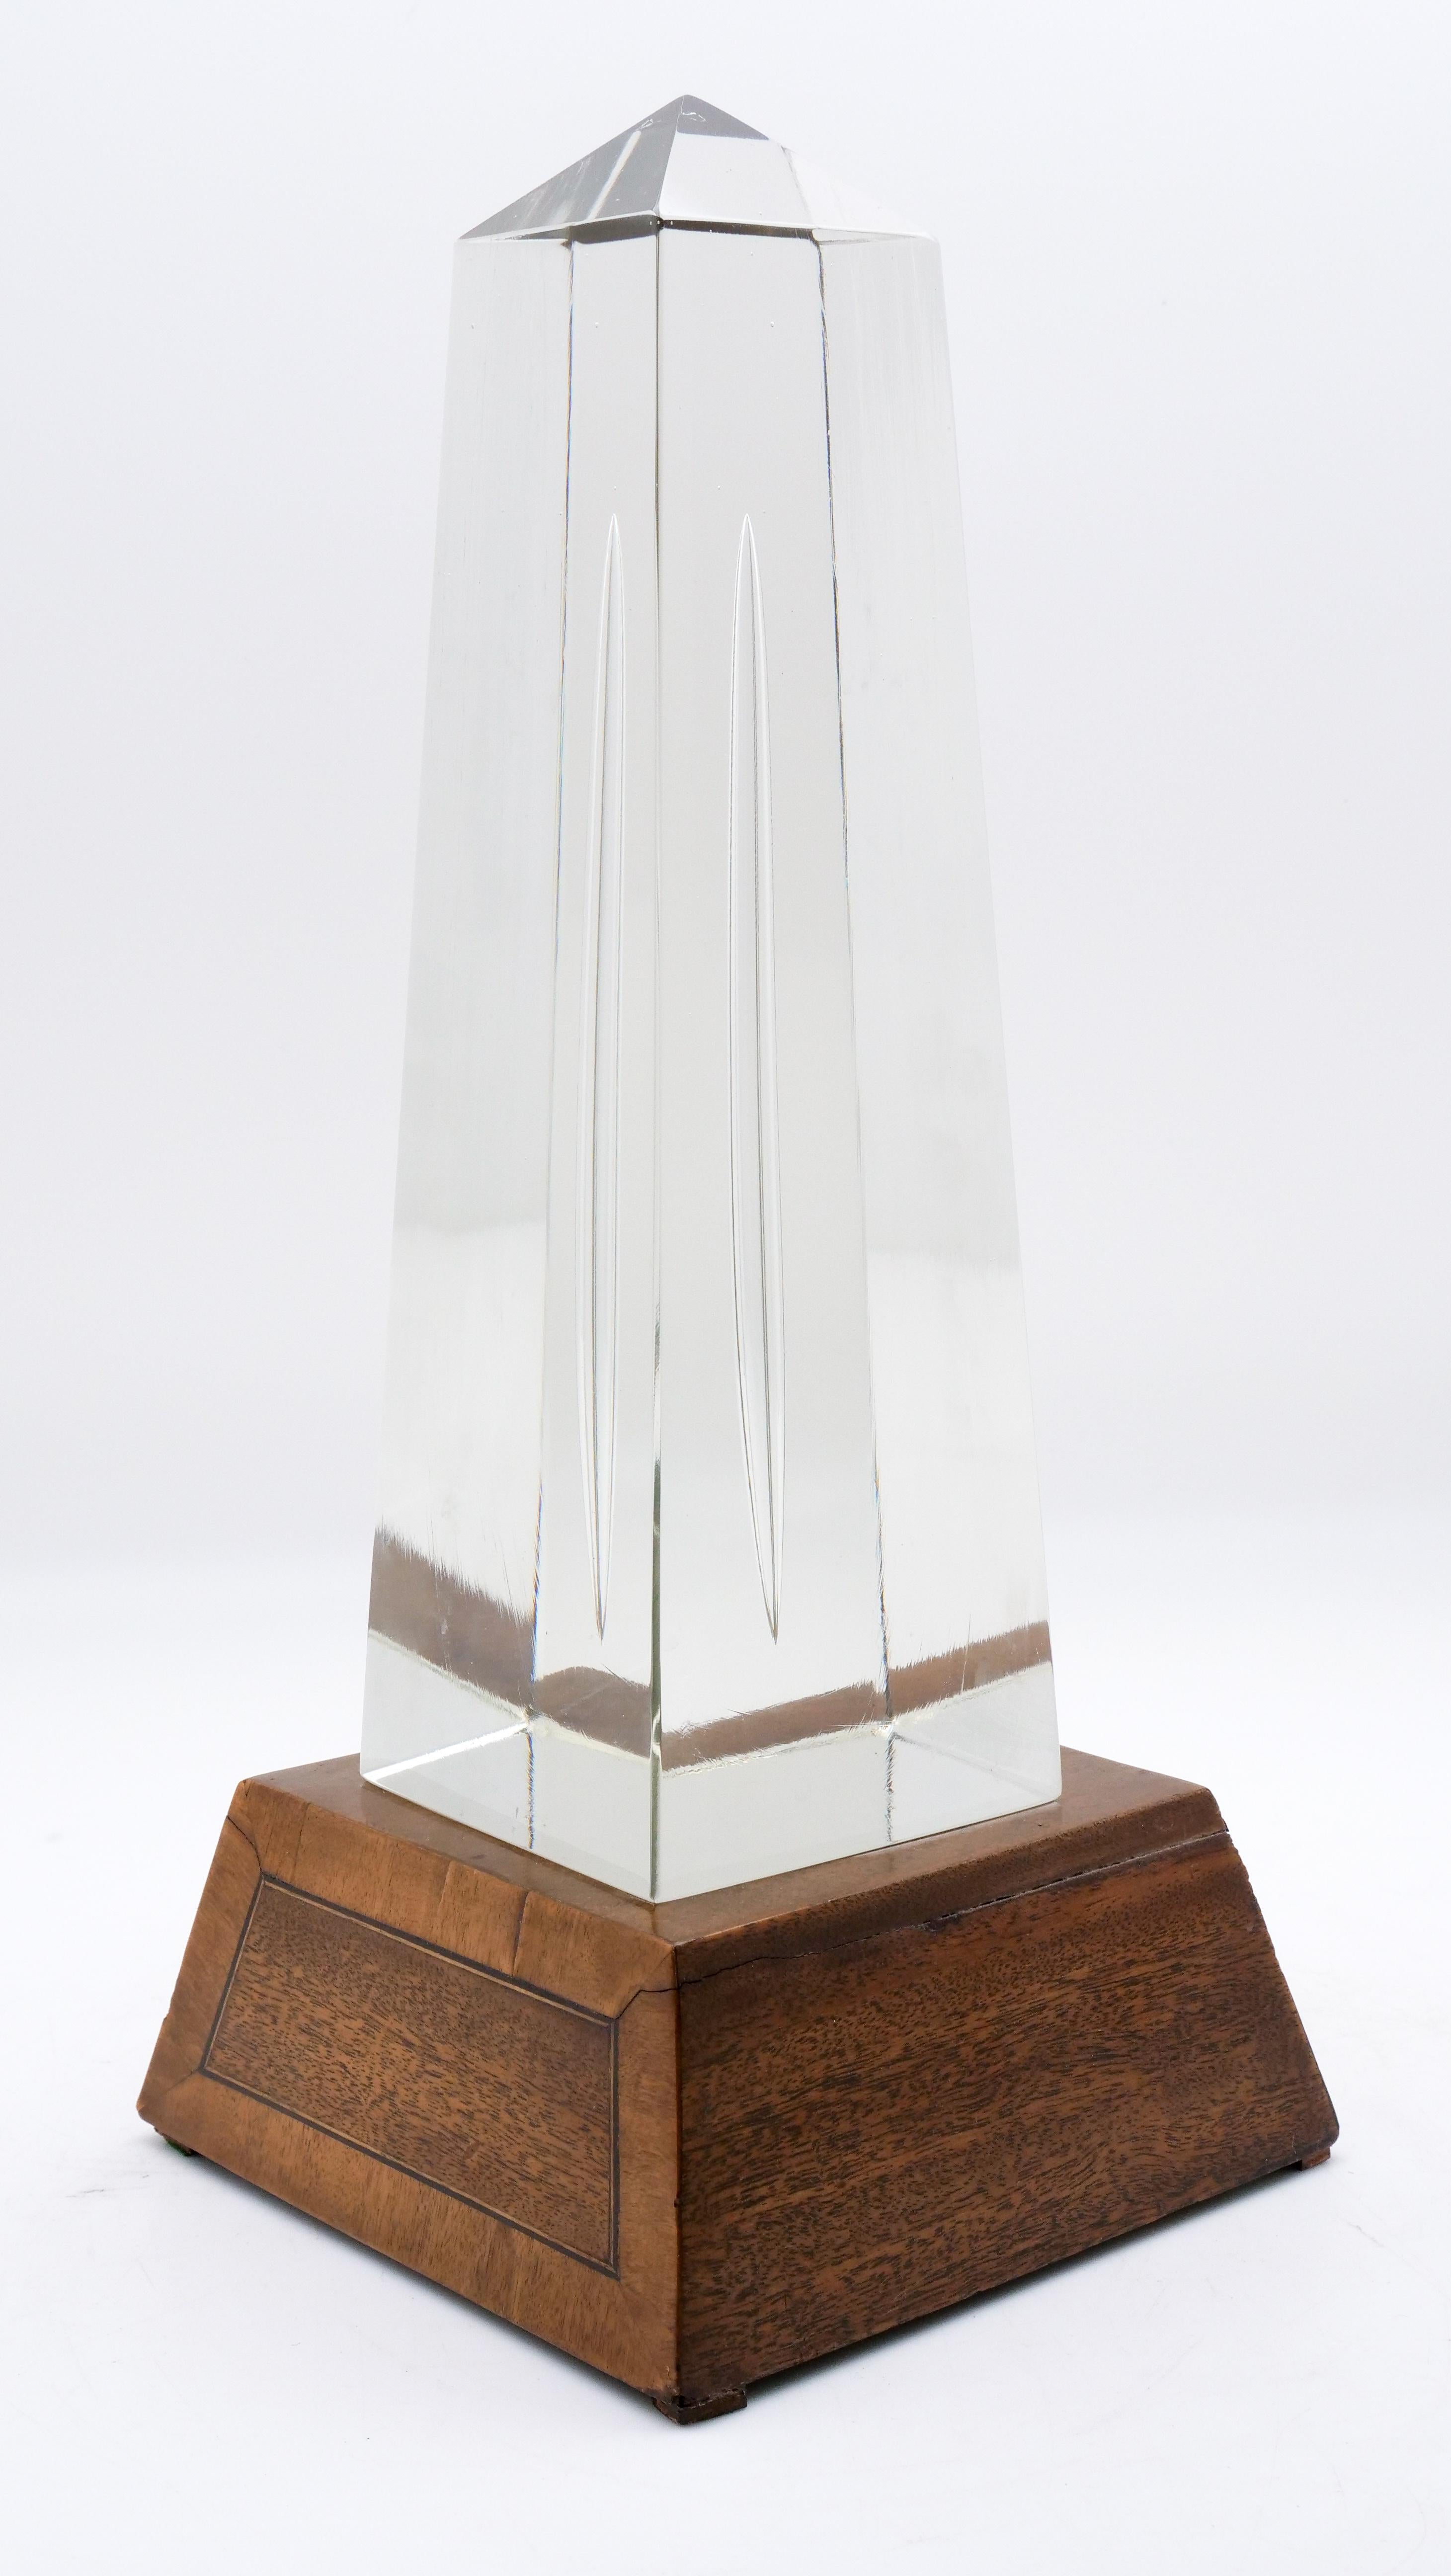 Glass obelisk with mahogany stand, circa 1830, English (2 separate pieces).